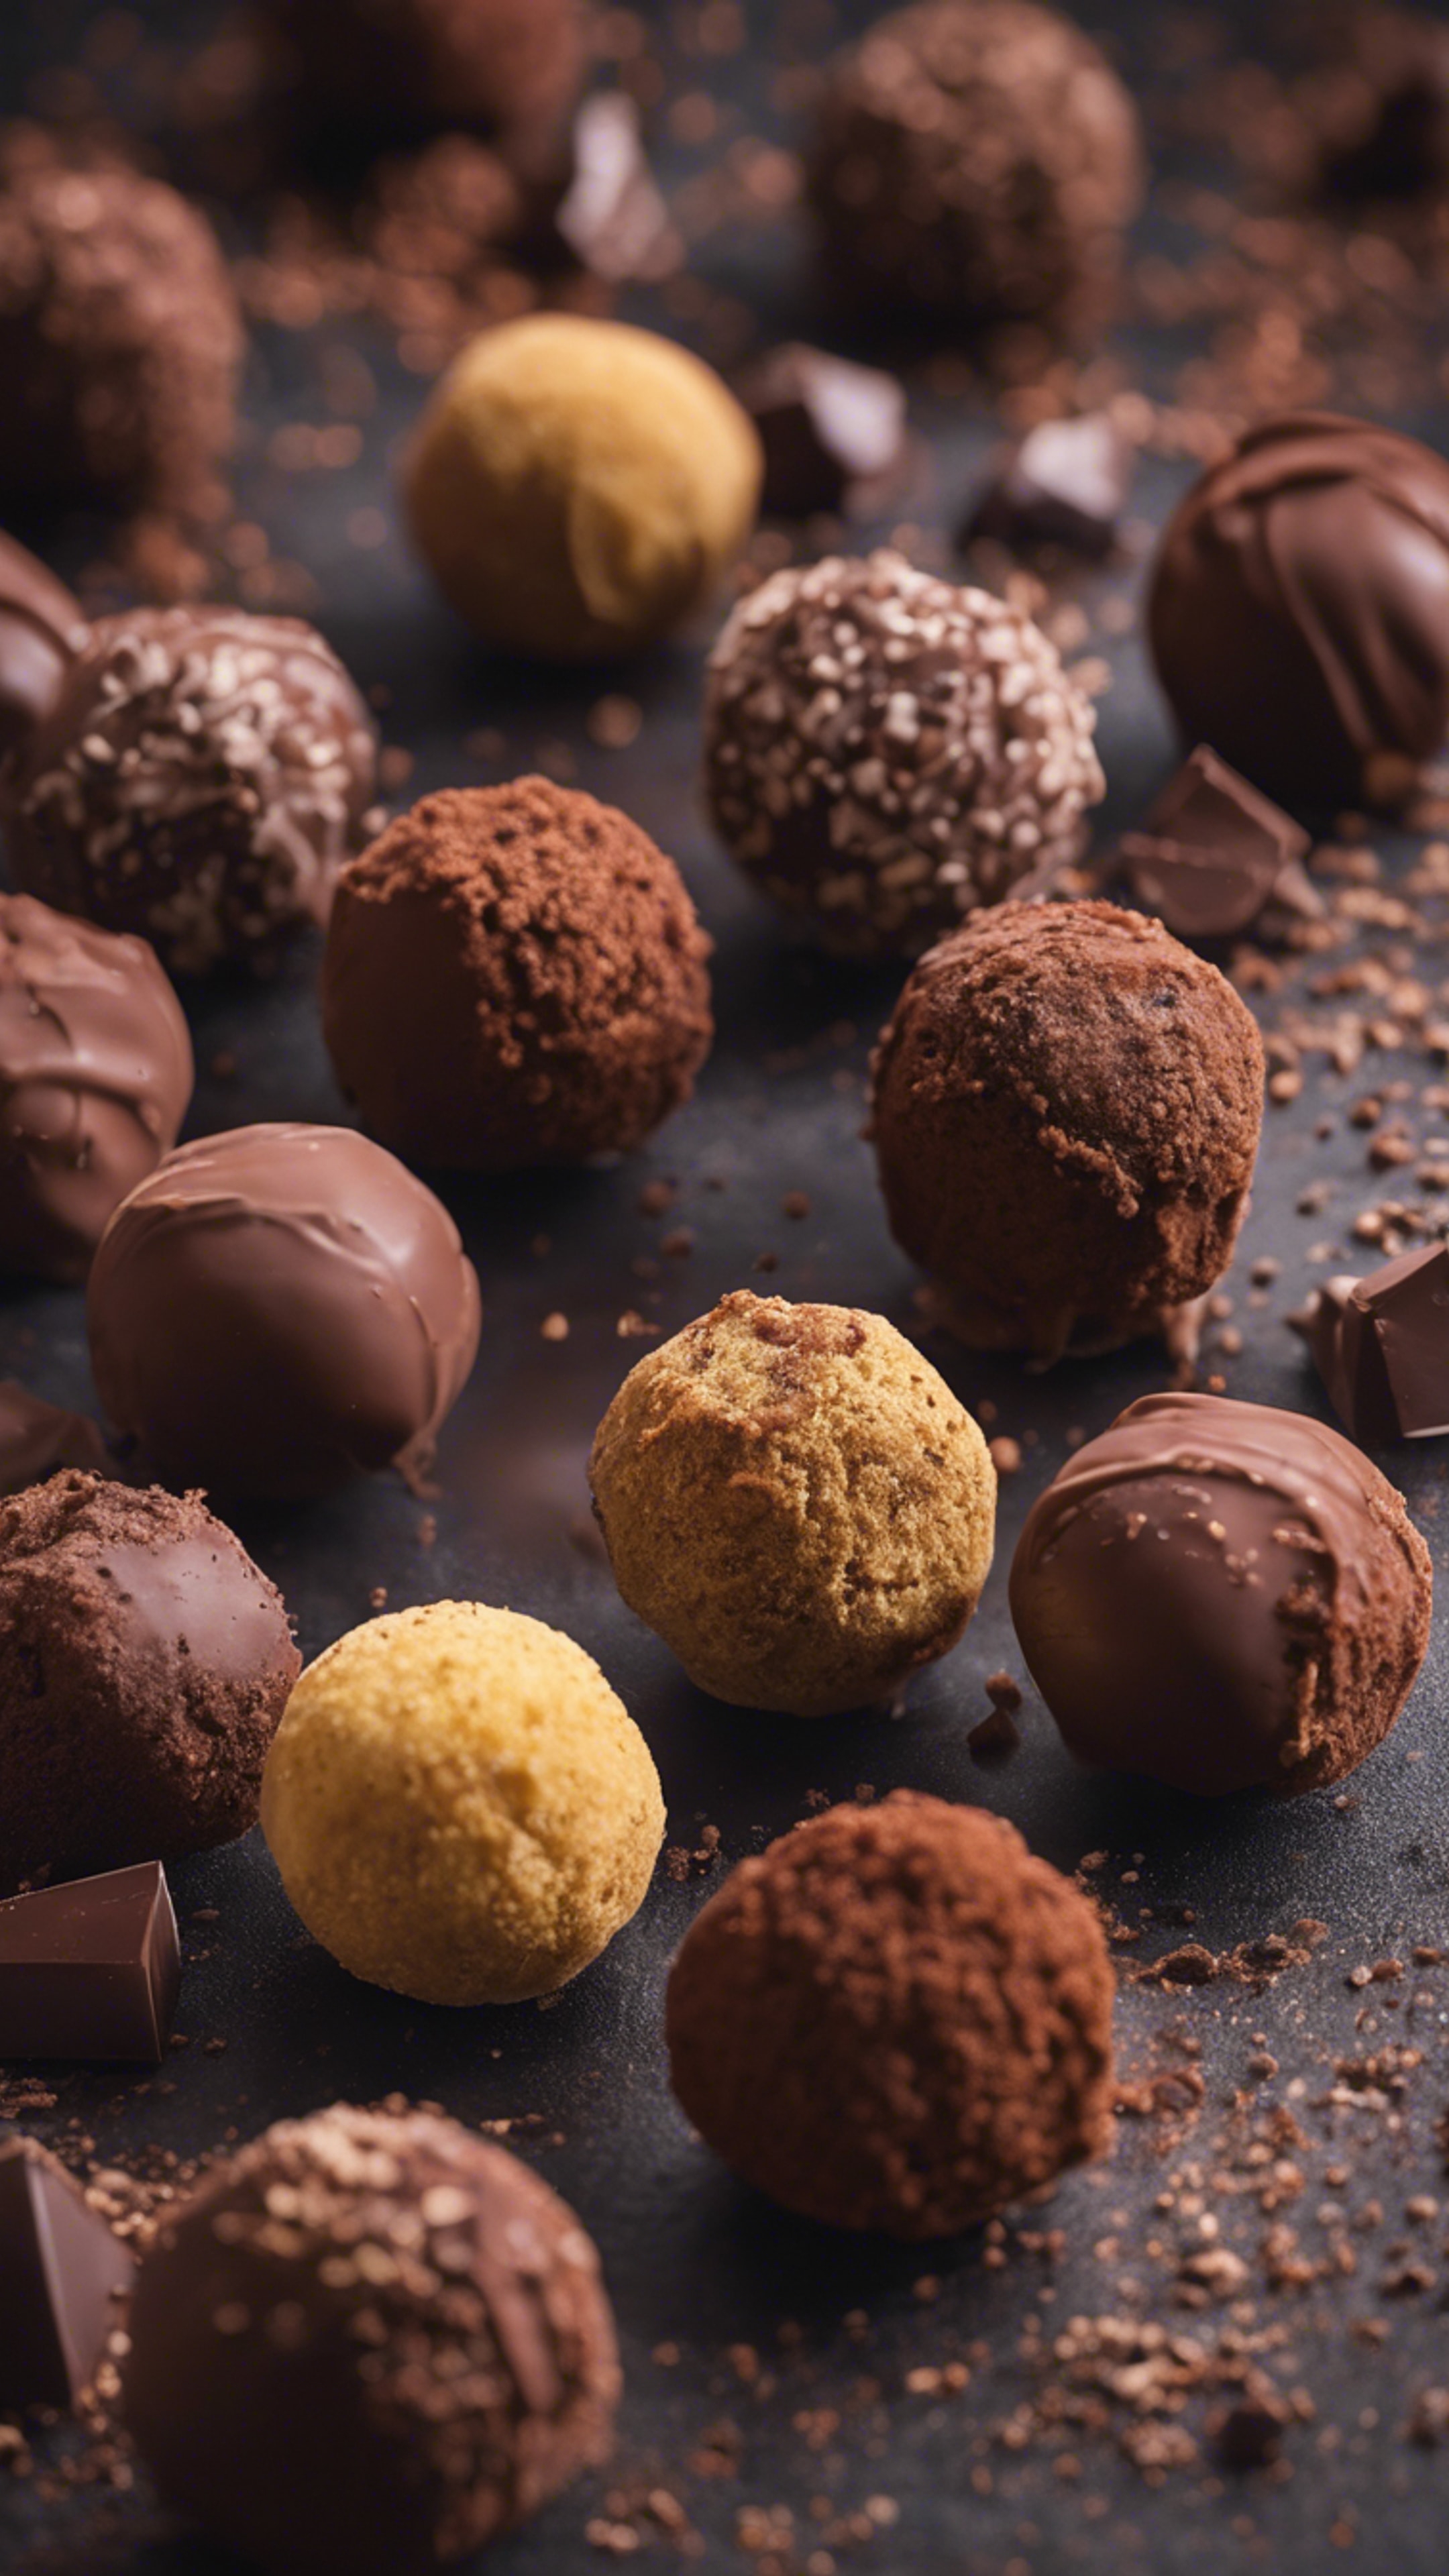 An assortment of delicious, delectable brown chocolate truffles Wallpaper[070a36241272450fb9f4]